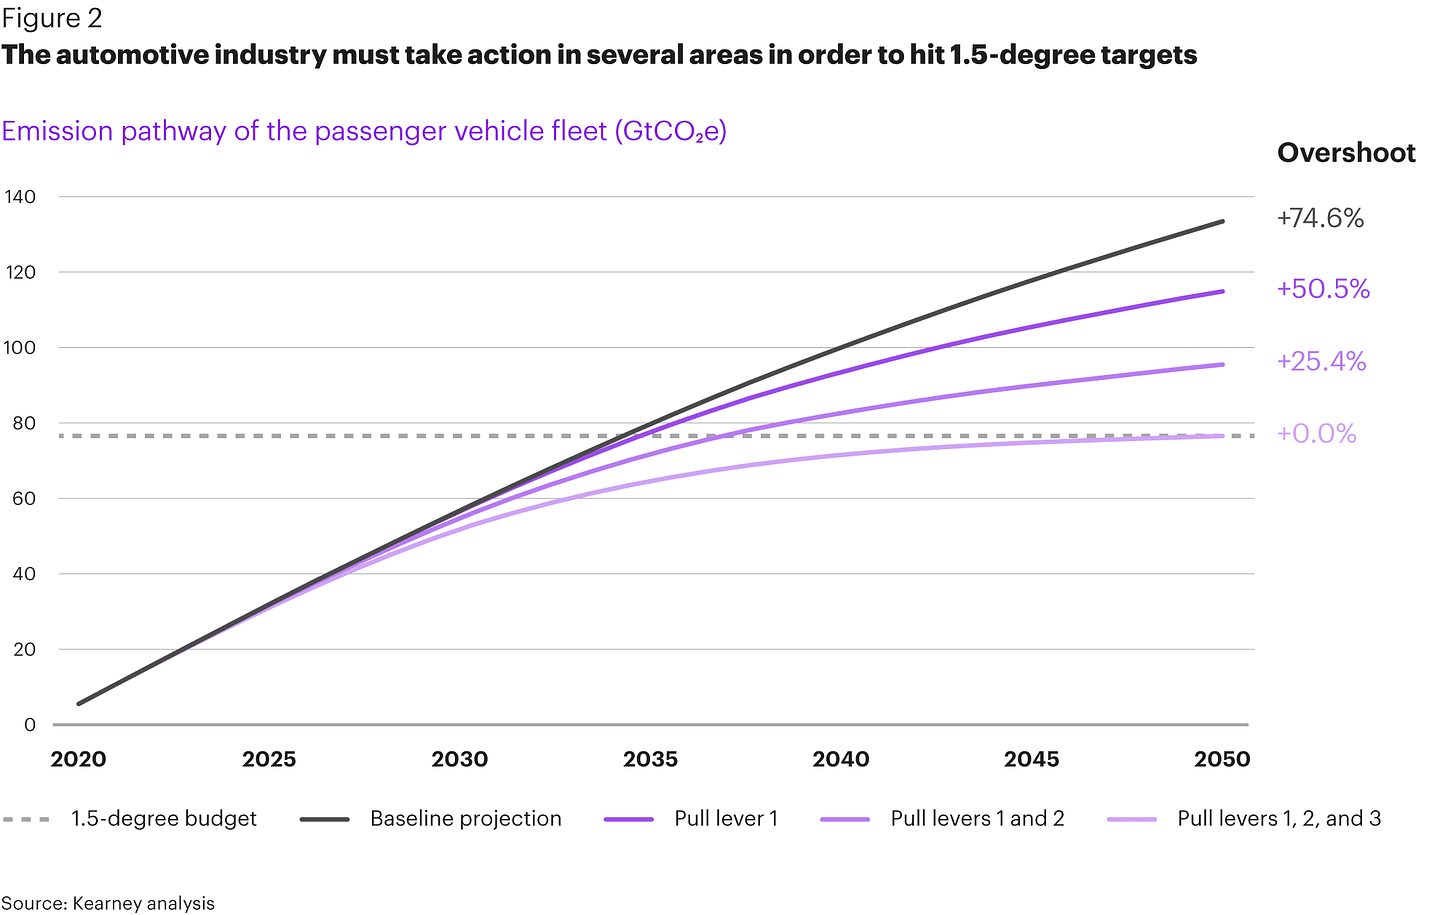 Figure 02: The automotive industry must take action in several areas in order to hit 1.5-degree targets